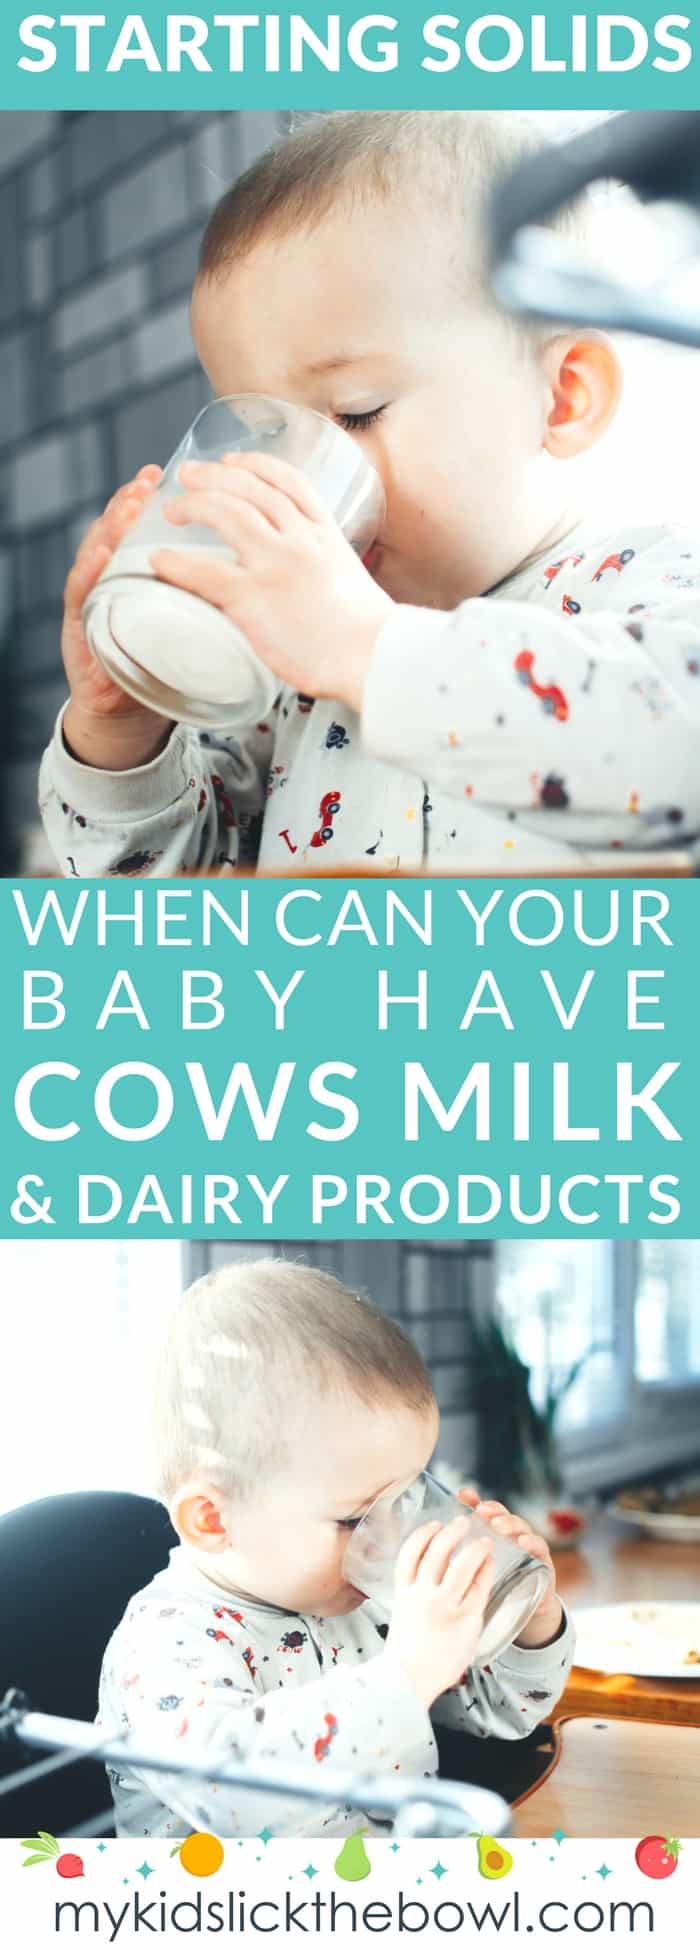 starting solids when can babies have cows milk, a guide and tips on getting started with food safely